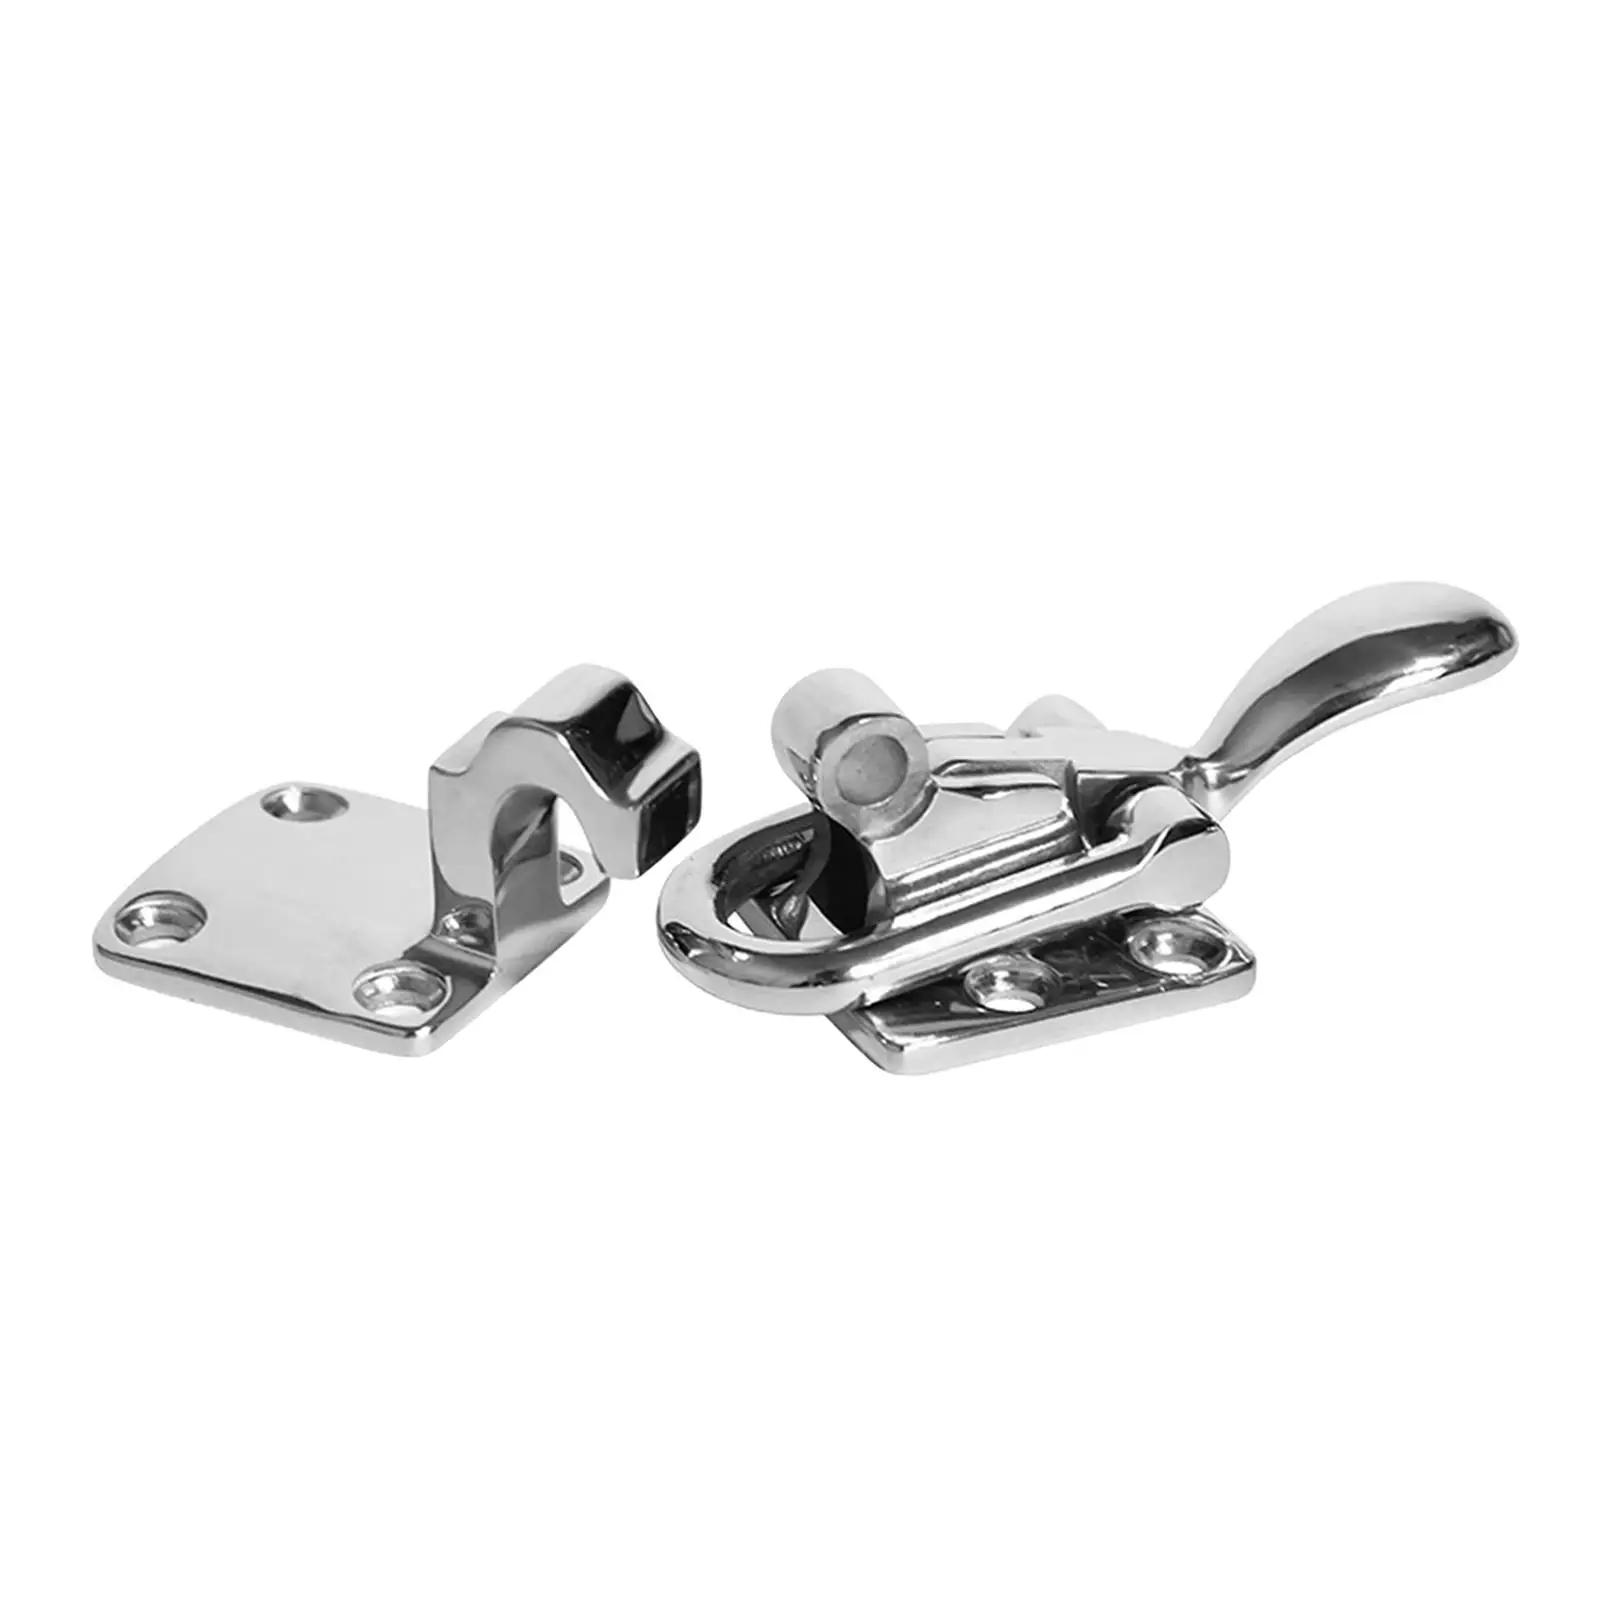 Door Lock Latch Polished Stainless Steel Bag Buckles Anti Rattle Latch Fastener Clamp Fit for Marine Yacht Boats